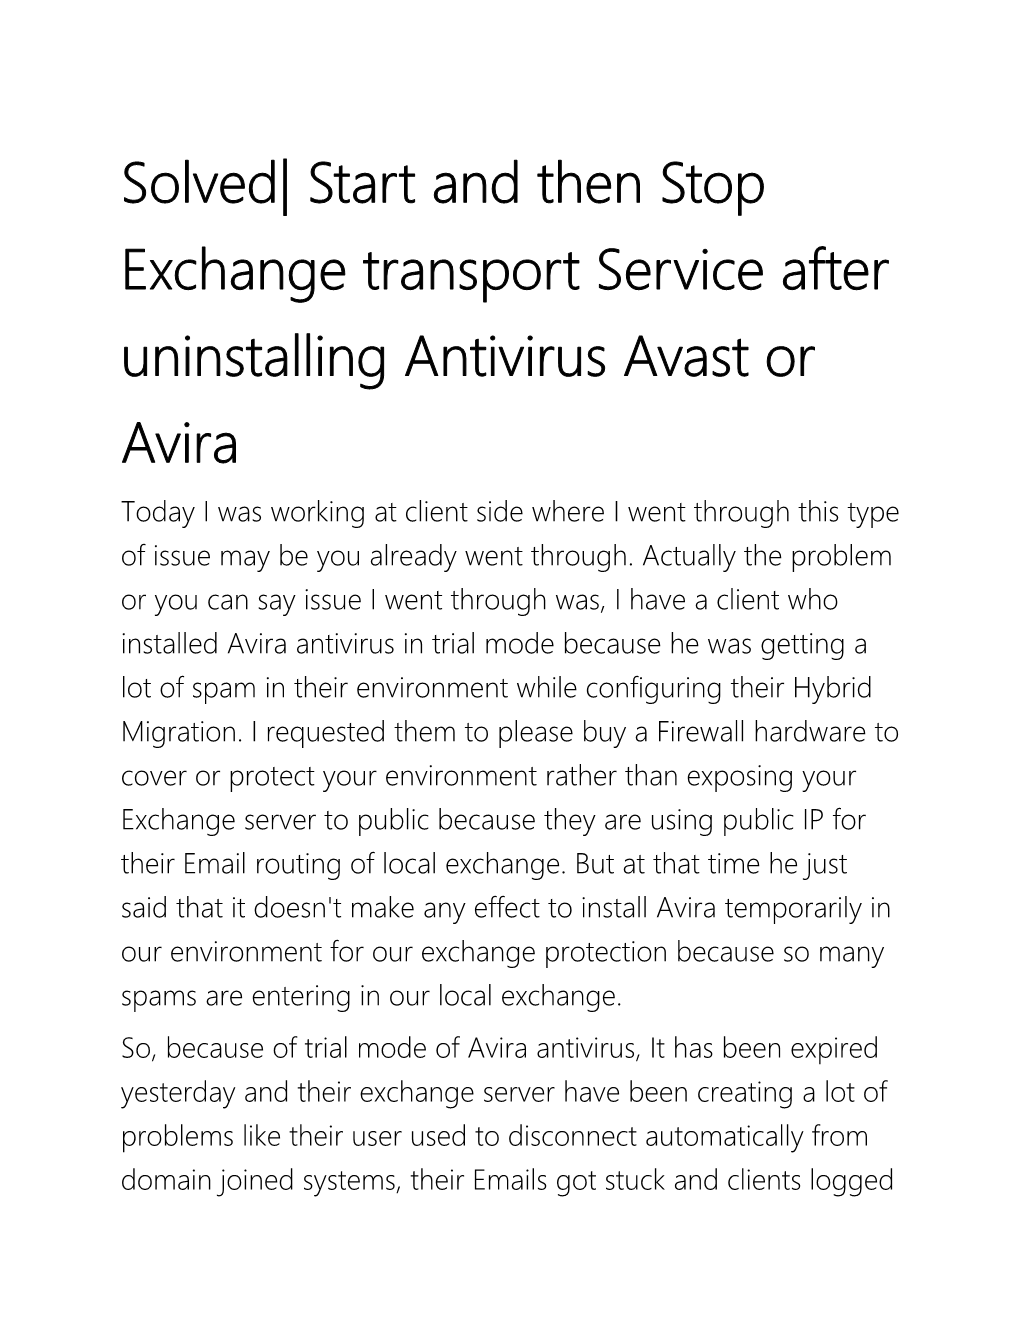 Solved Start and Then Stop Exchange Transport Service After Uninstalling Antivirus Avast